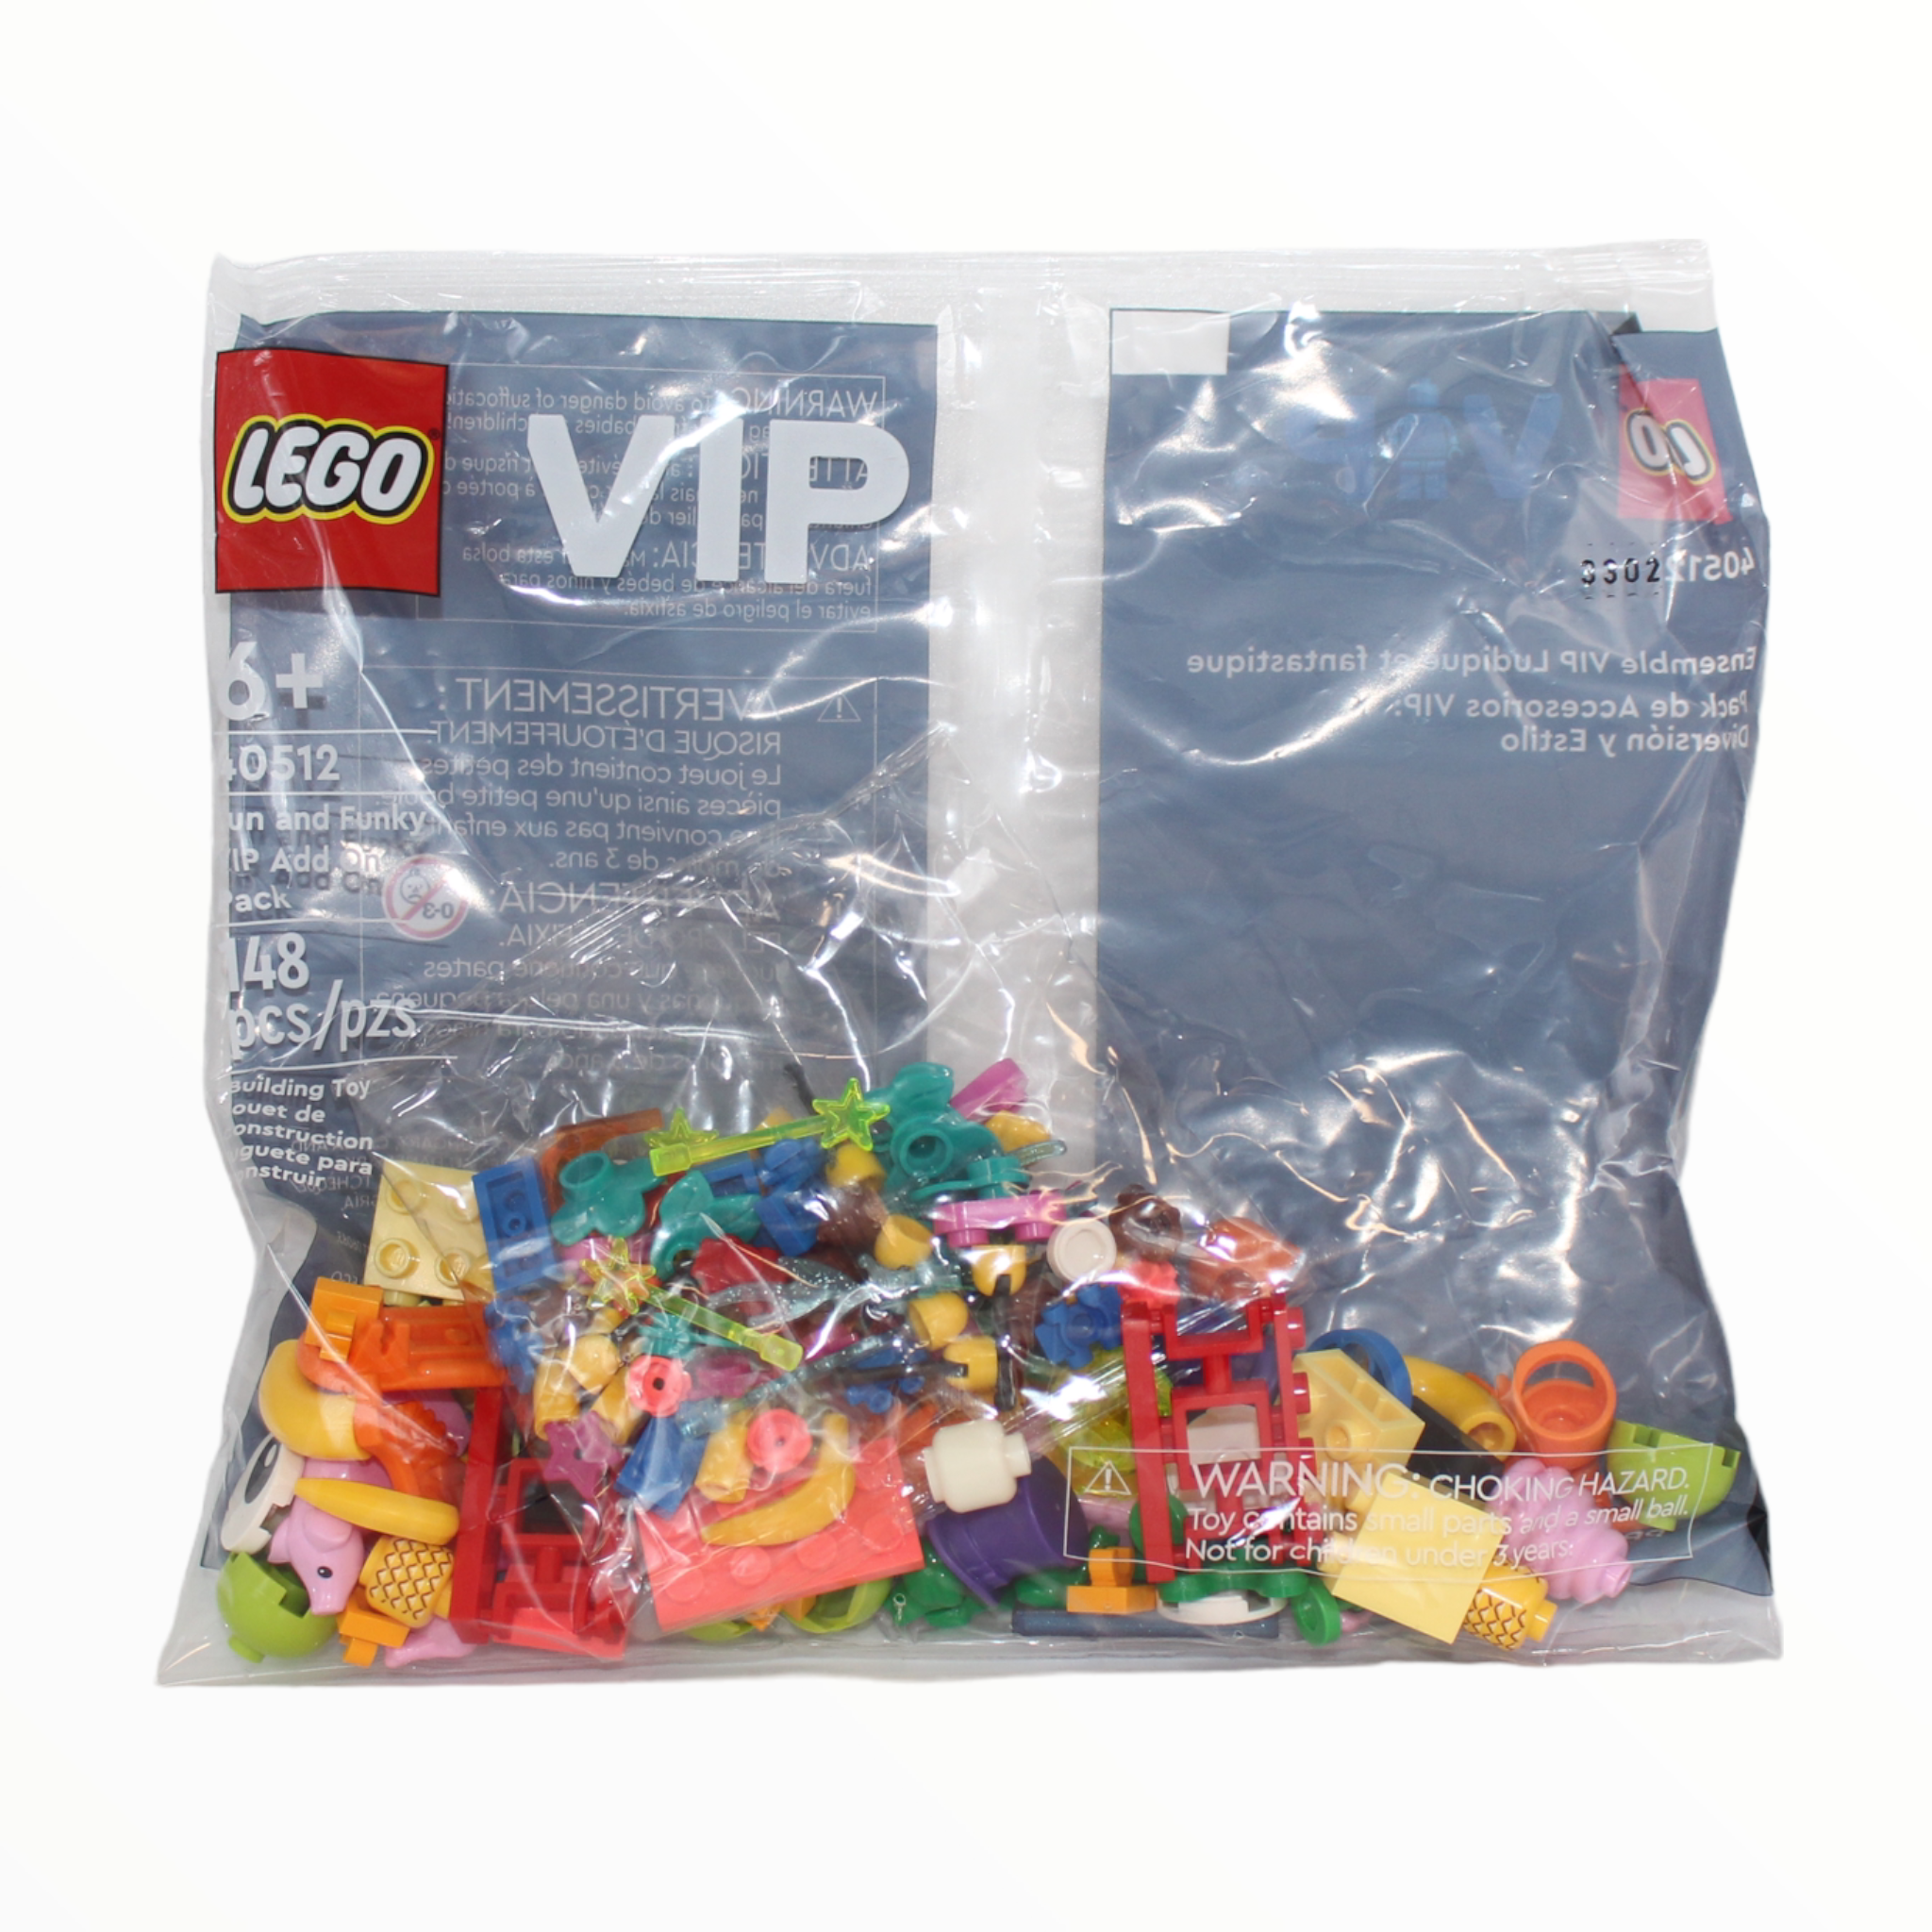 Polybag 40512 LEGO VIP Fun and Funky Add On Pack